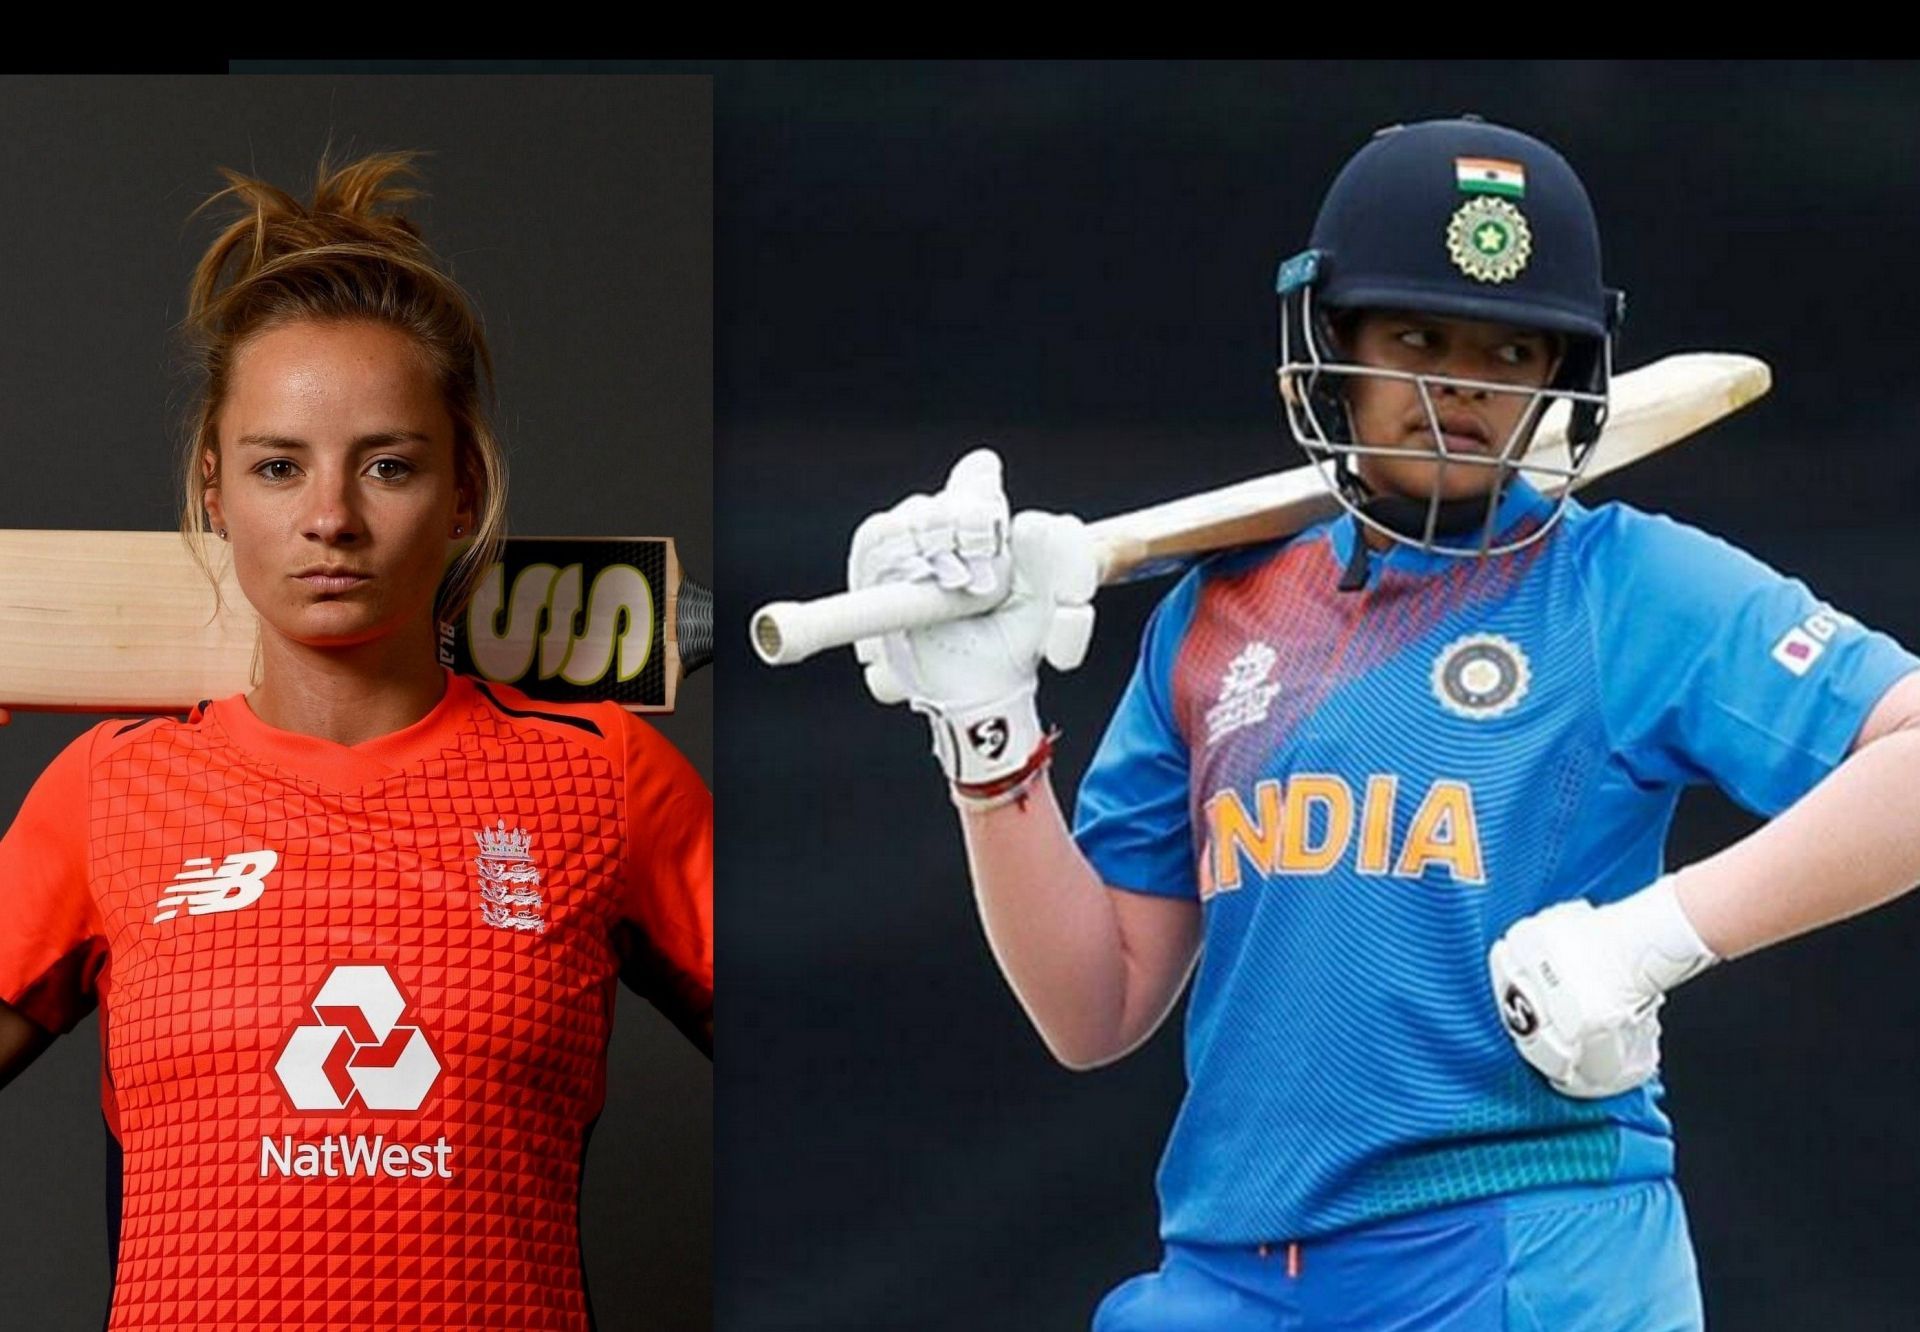 A six-hitting face-off between Danielle Wyatt (left) and Shafali Verma (right) should be a mouth-watering contest.